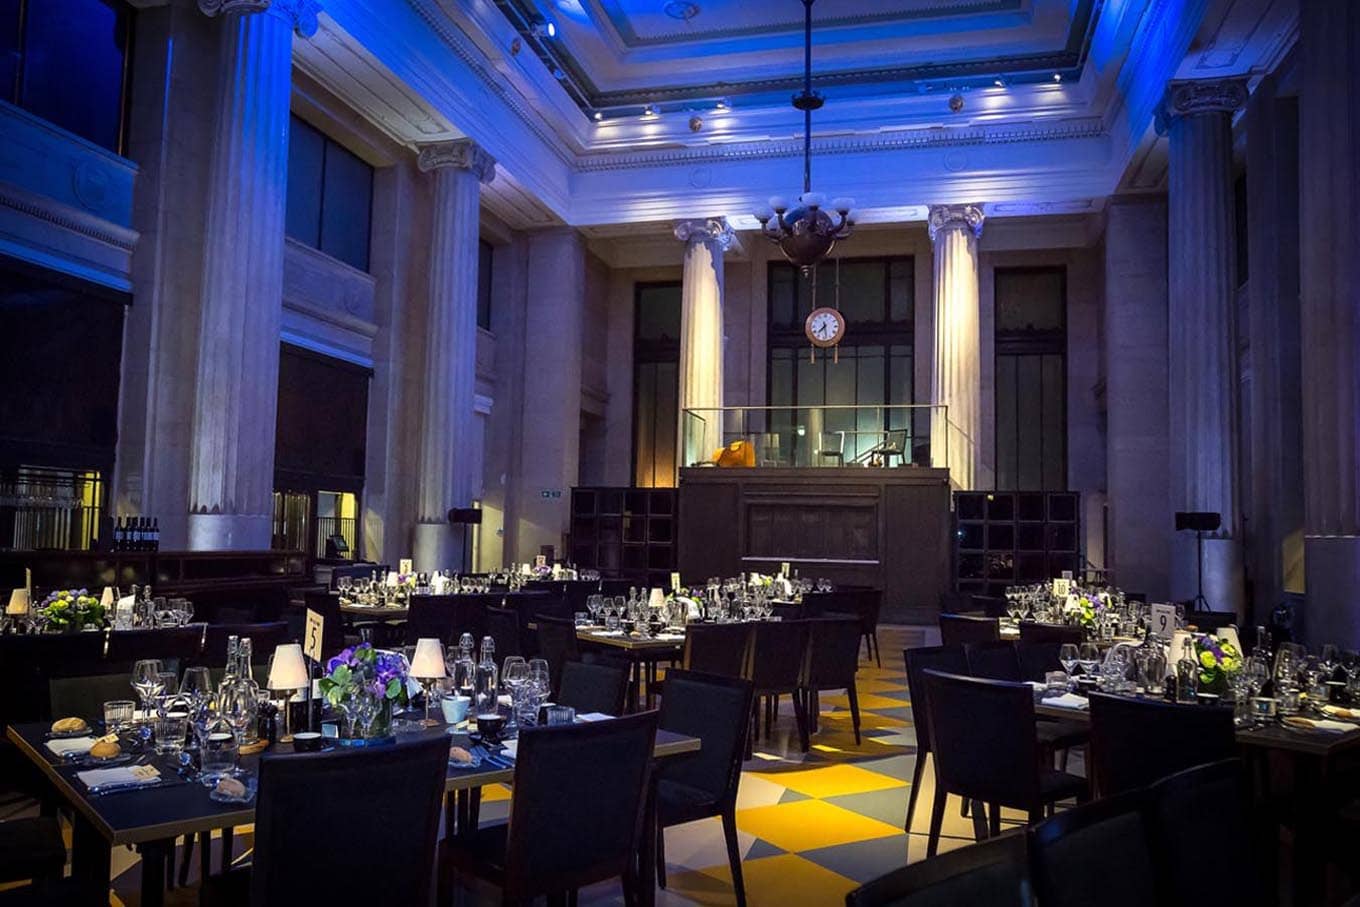 The Best You Gala Awards Dinner at The Banking Hall